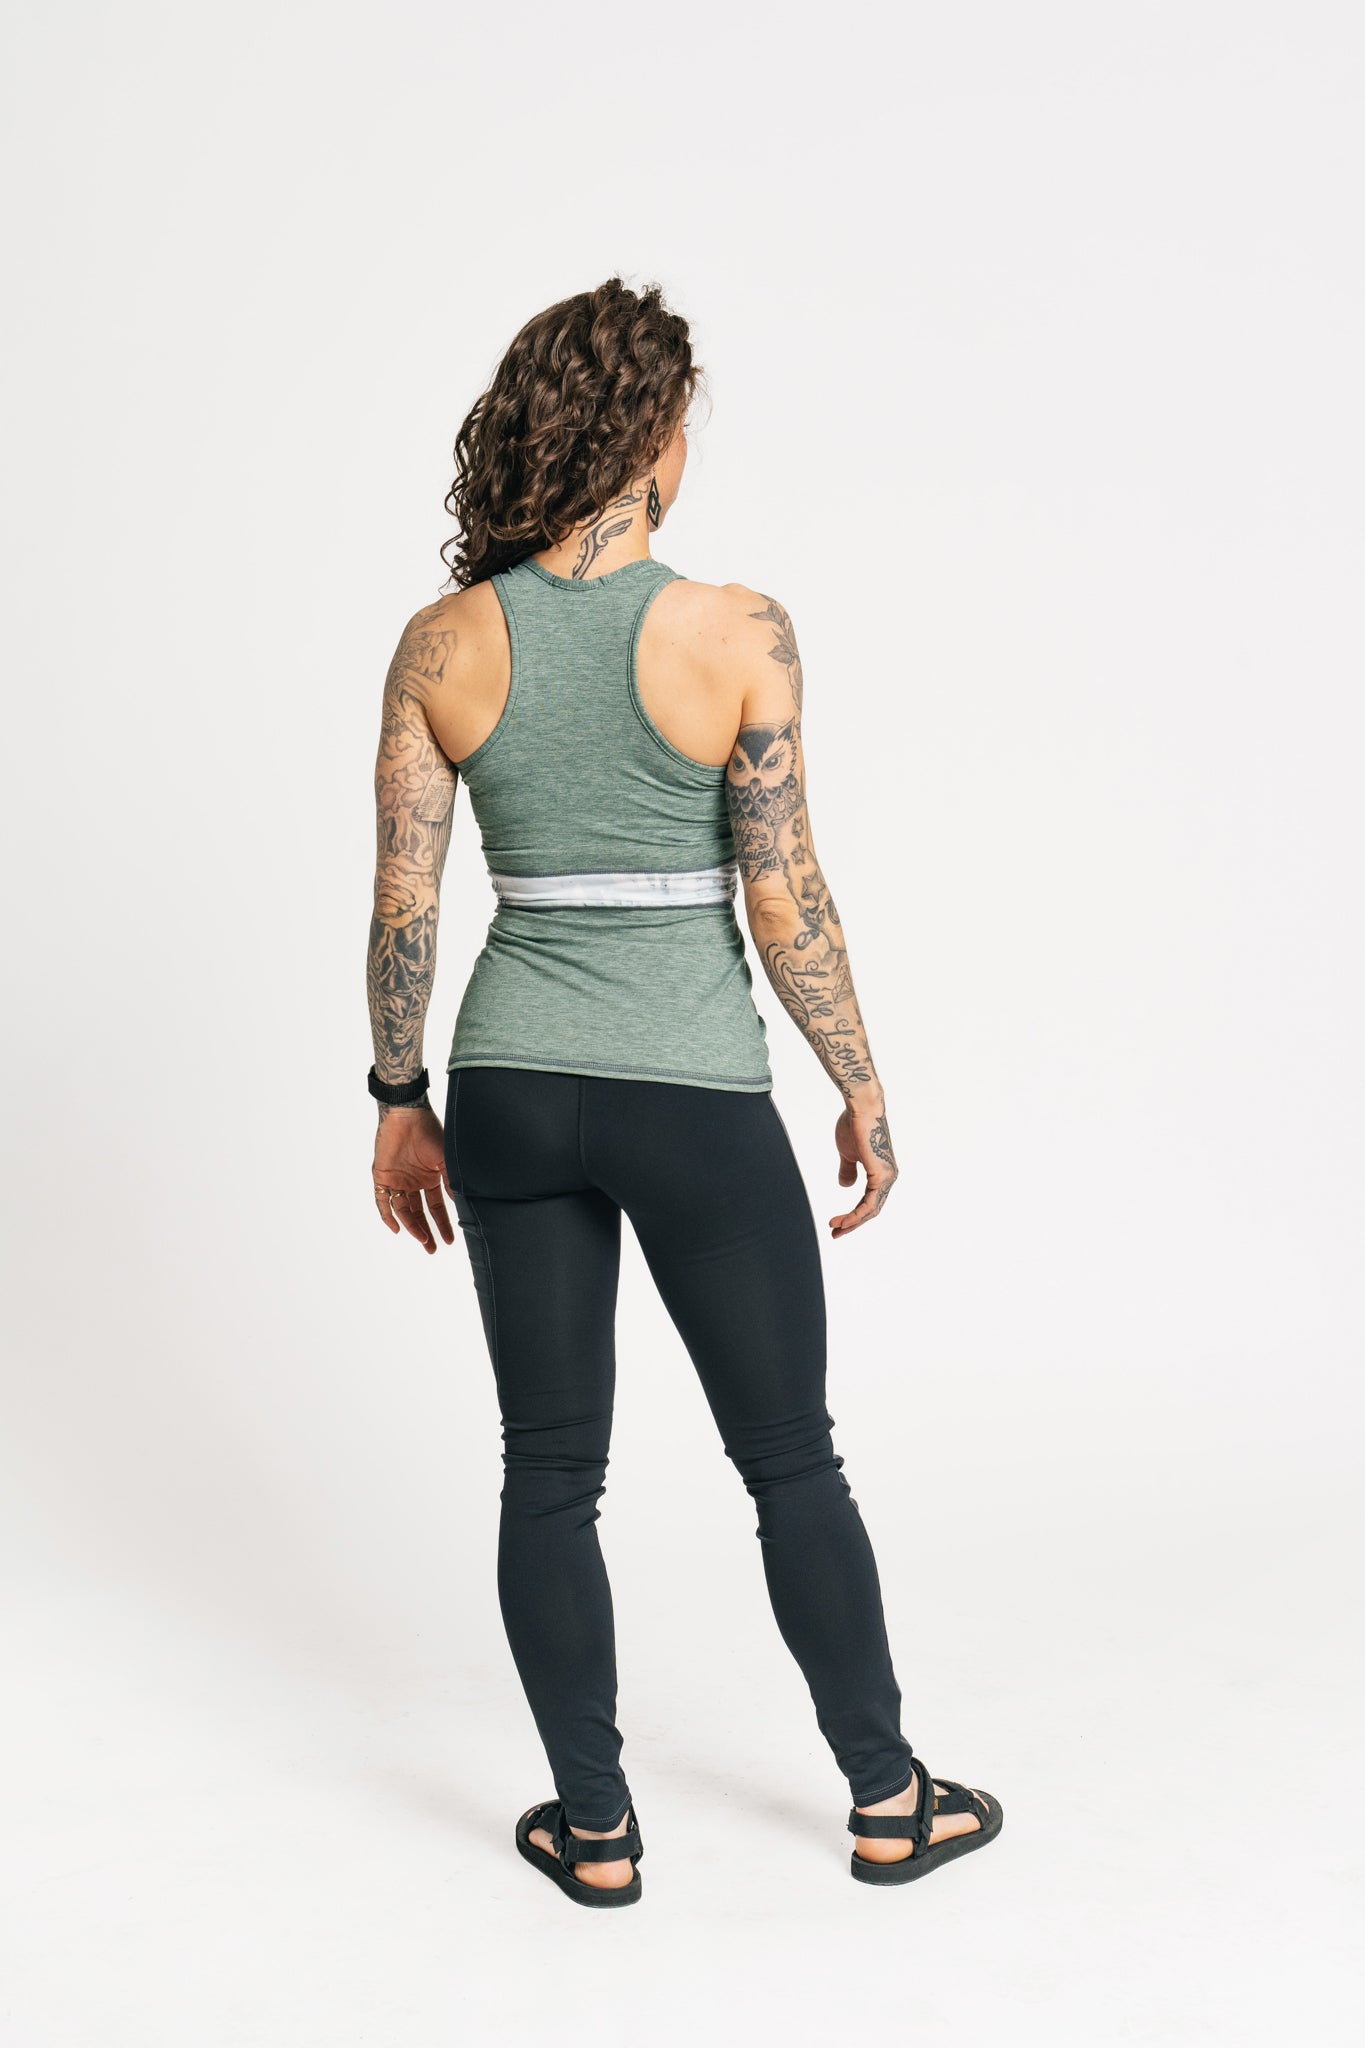 alpine fit hiking leggings on model with tattoo from behind